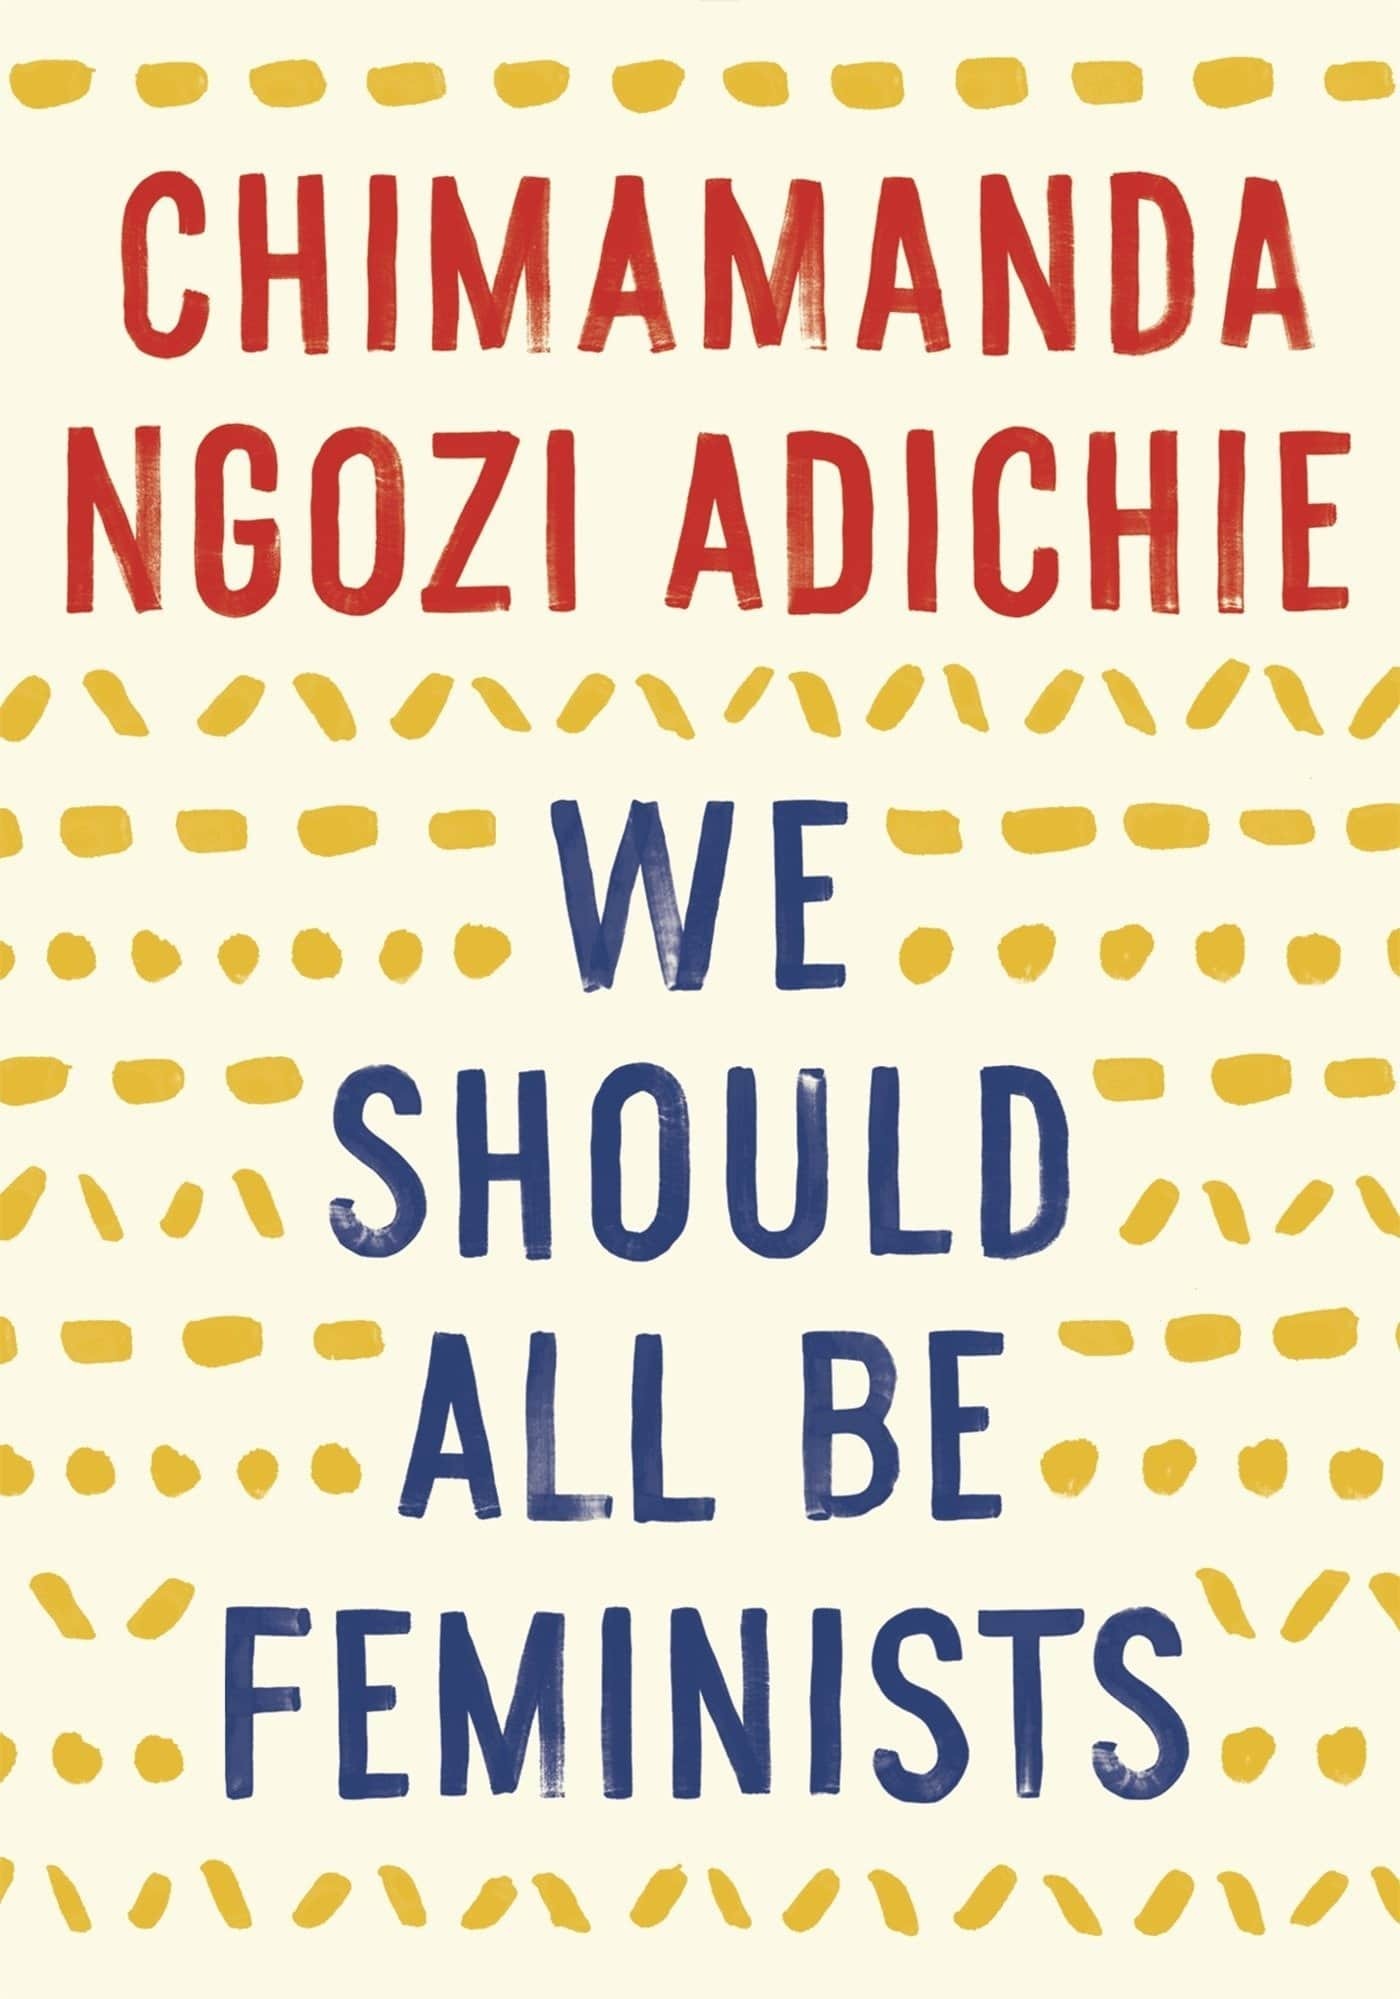 <a href="https://www.chimamanda.com/" rel="noreferrer noopener">Chimamanda Ngozi Adichie</a> is a renowned Nigerian novelist who captivated audiences with the very popular <a href="https://youtu.be/hg3umXU_qWc?feature=shared" rel="noreferrer noopener">TEDx Talk</a> that inspired <a href="https://www.goodreads.com/book/show/22738563-we-should-all-be-feminists?from_search=true&from_srp=true&qid=DfptdQl2CD&rank=1" rel="noreferrer noopener">this book</a><strong>.</strong> Adichie addresses the stereotypes that “feminists” face outside the Western world, where this term is an undesirable label used to marginalize women. By shining a light on discrimination and systemic barriers that marginalize women, she makes the case for why the gender divide is detrimental to all of us and how each of us can embrace feminism to create a more inclusive, equitable world.